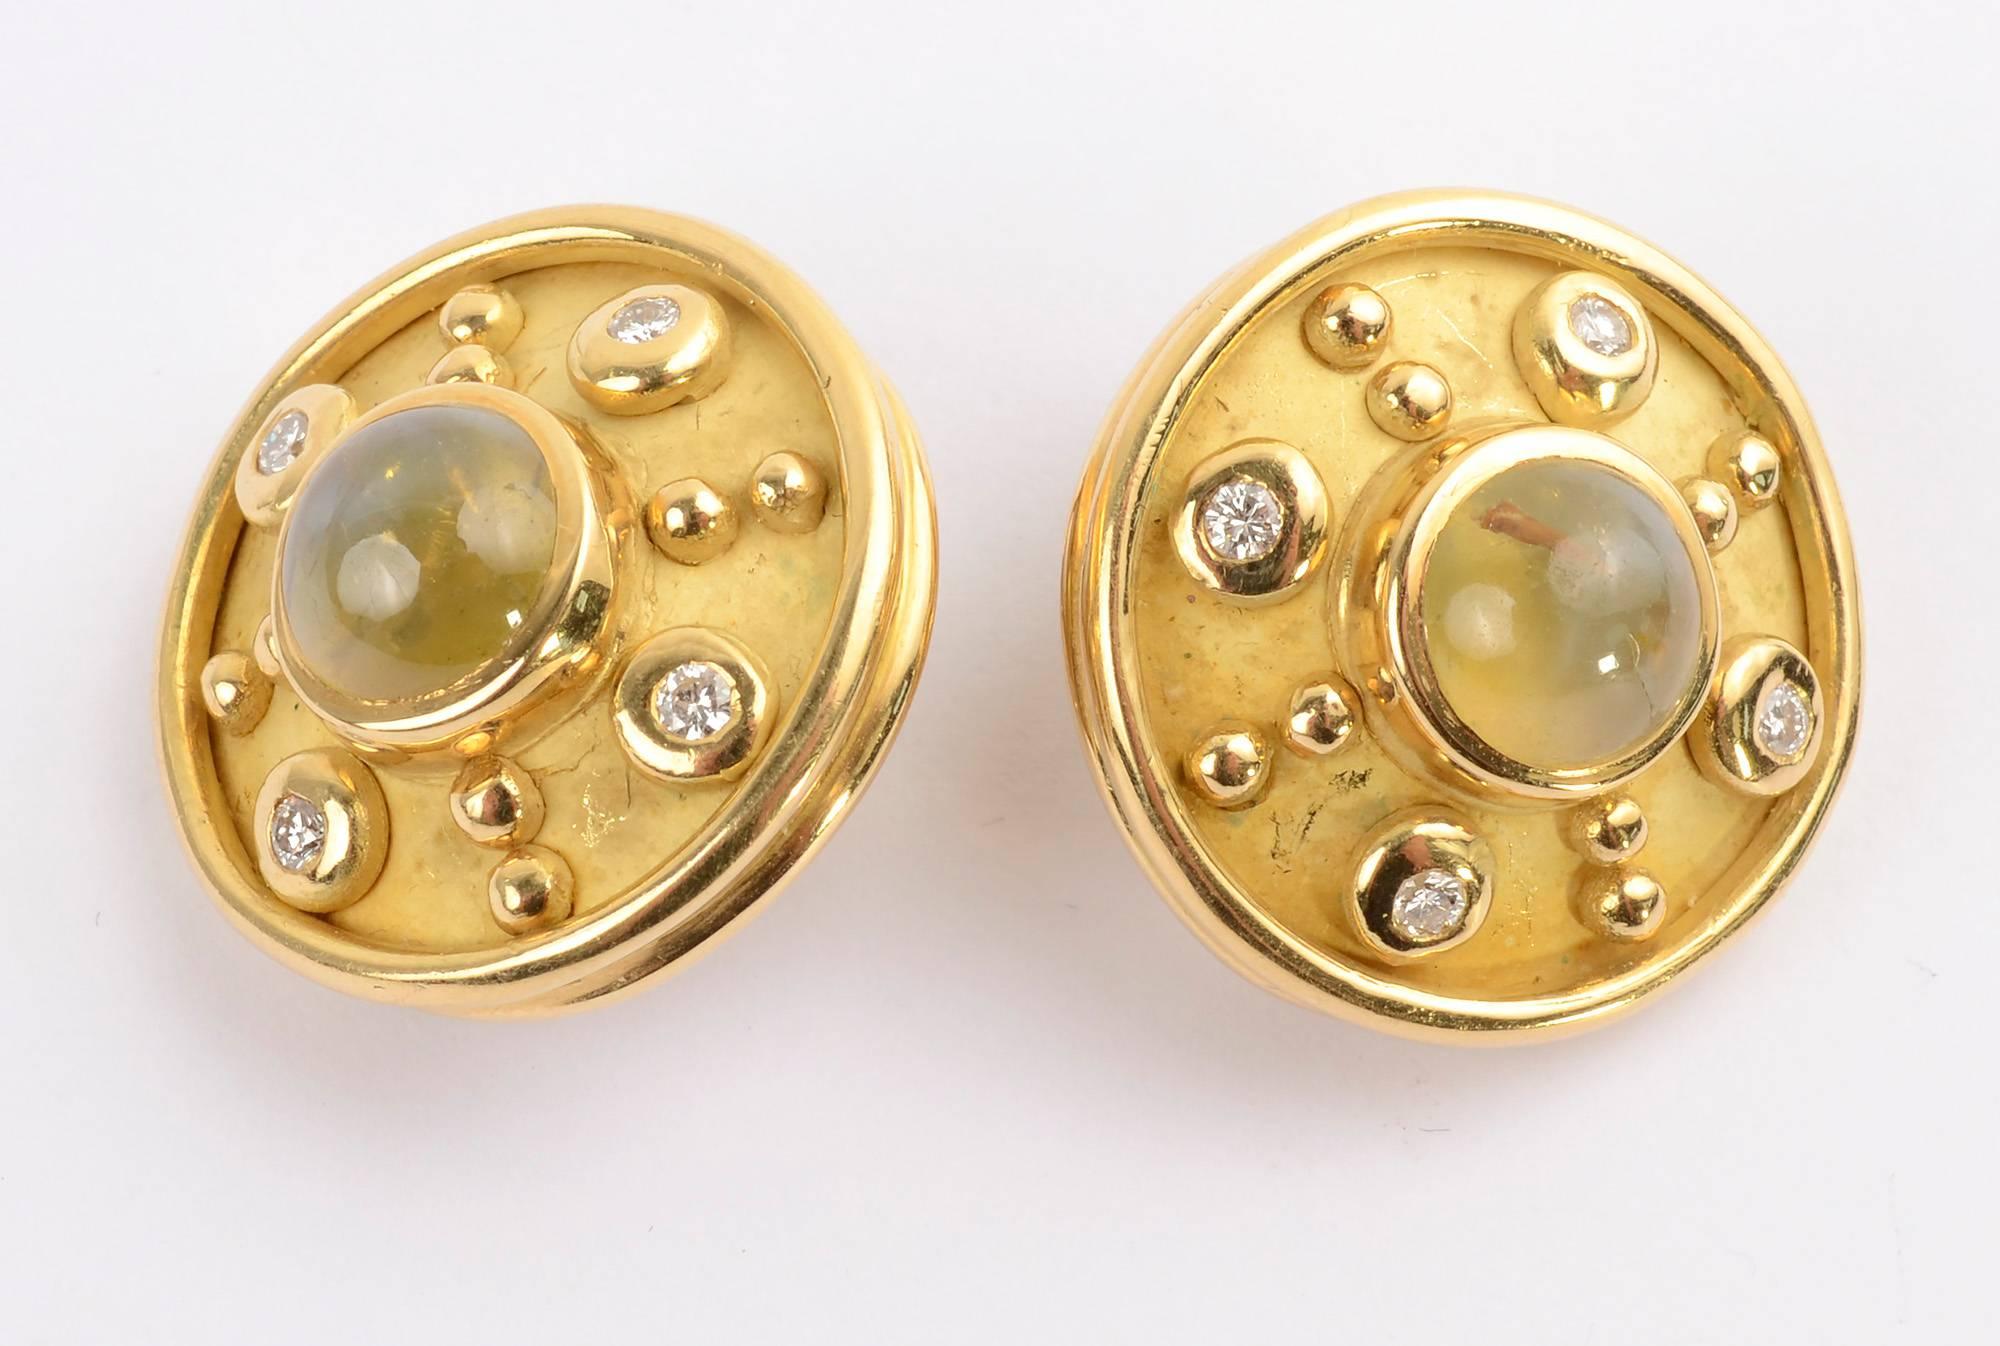 Sporty and stylish earrings by Denise Roberge. Each is centered with a cat's eye chrysoberyl measuring 5/16